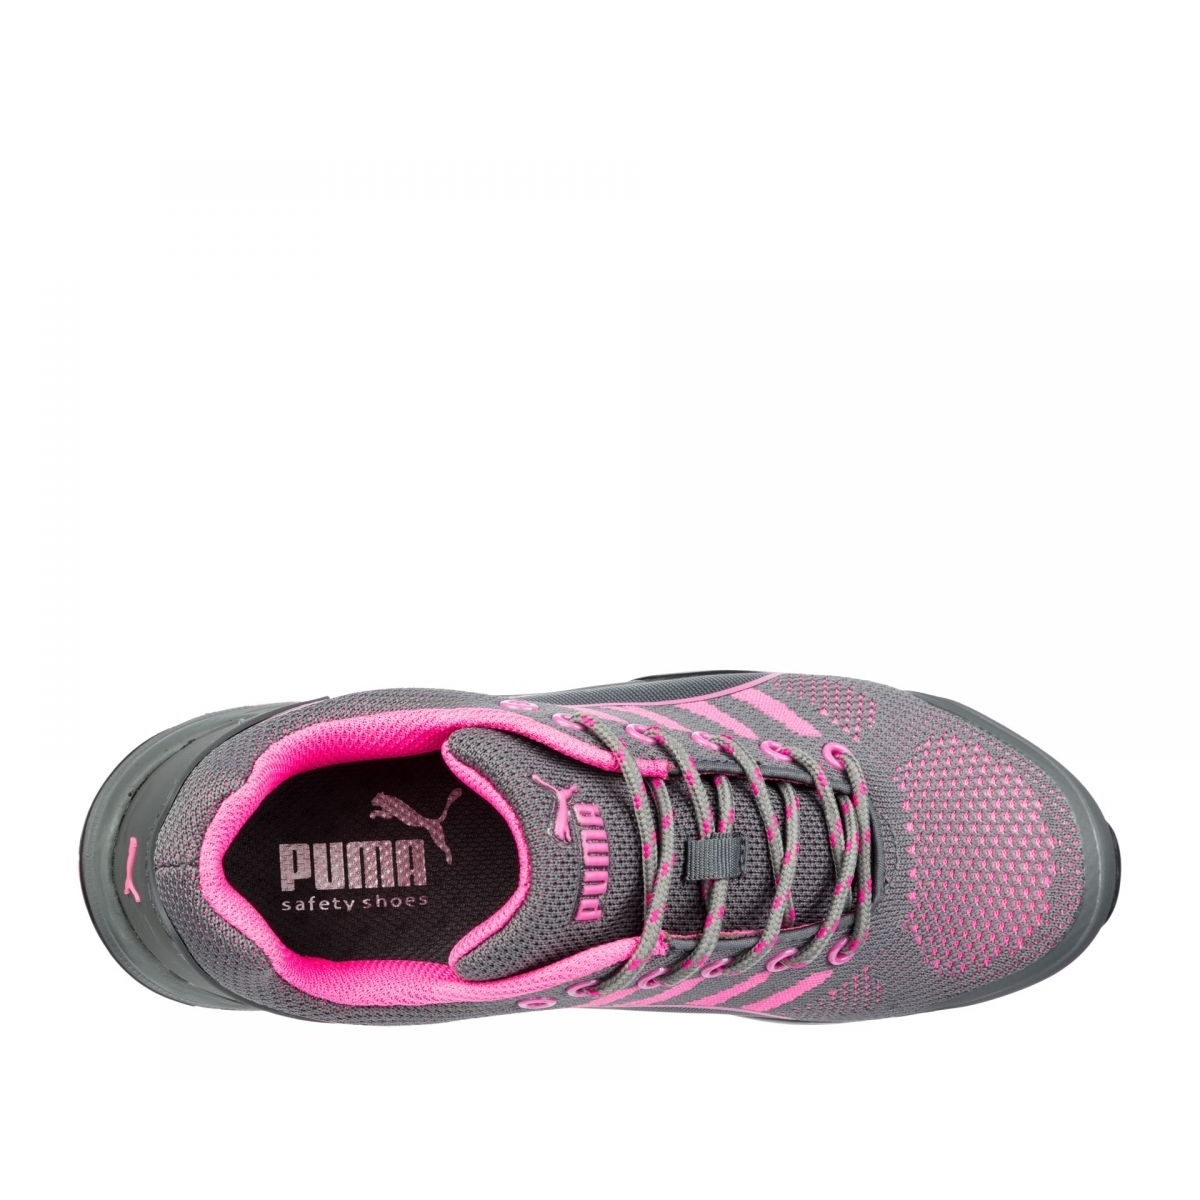 PUMA Safety Women's Celerity Knit Low Steel Toe ESD Work Shoe Pink - 642915 ONE SIZE PINK - PINK, 9